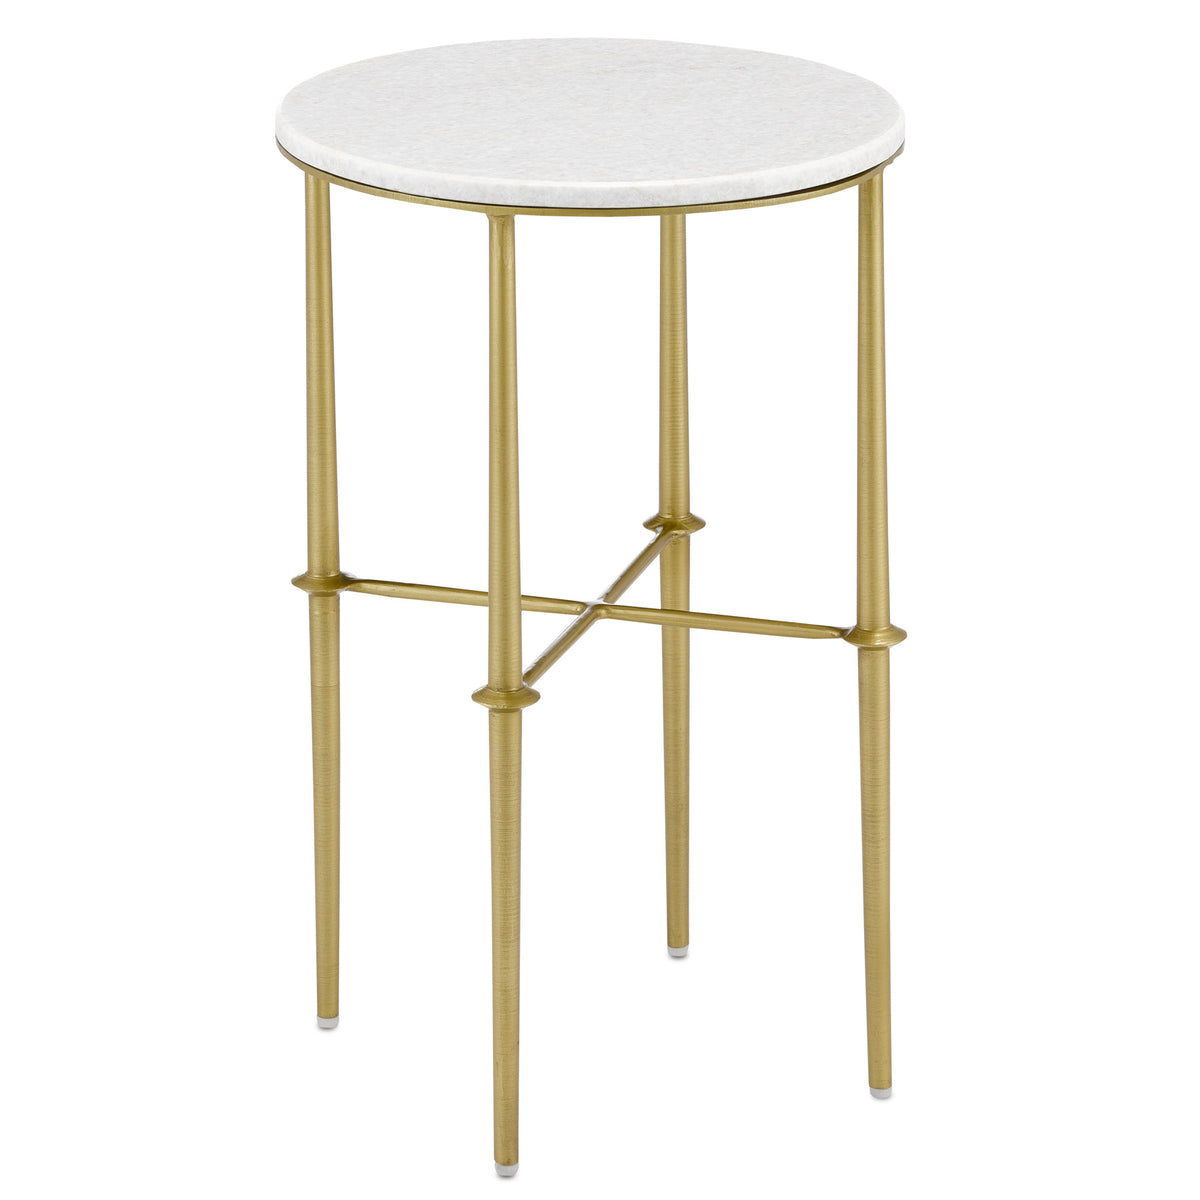 Kira Accent Table